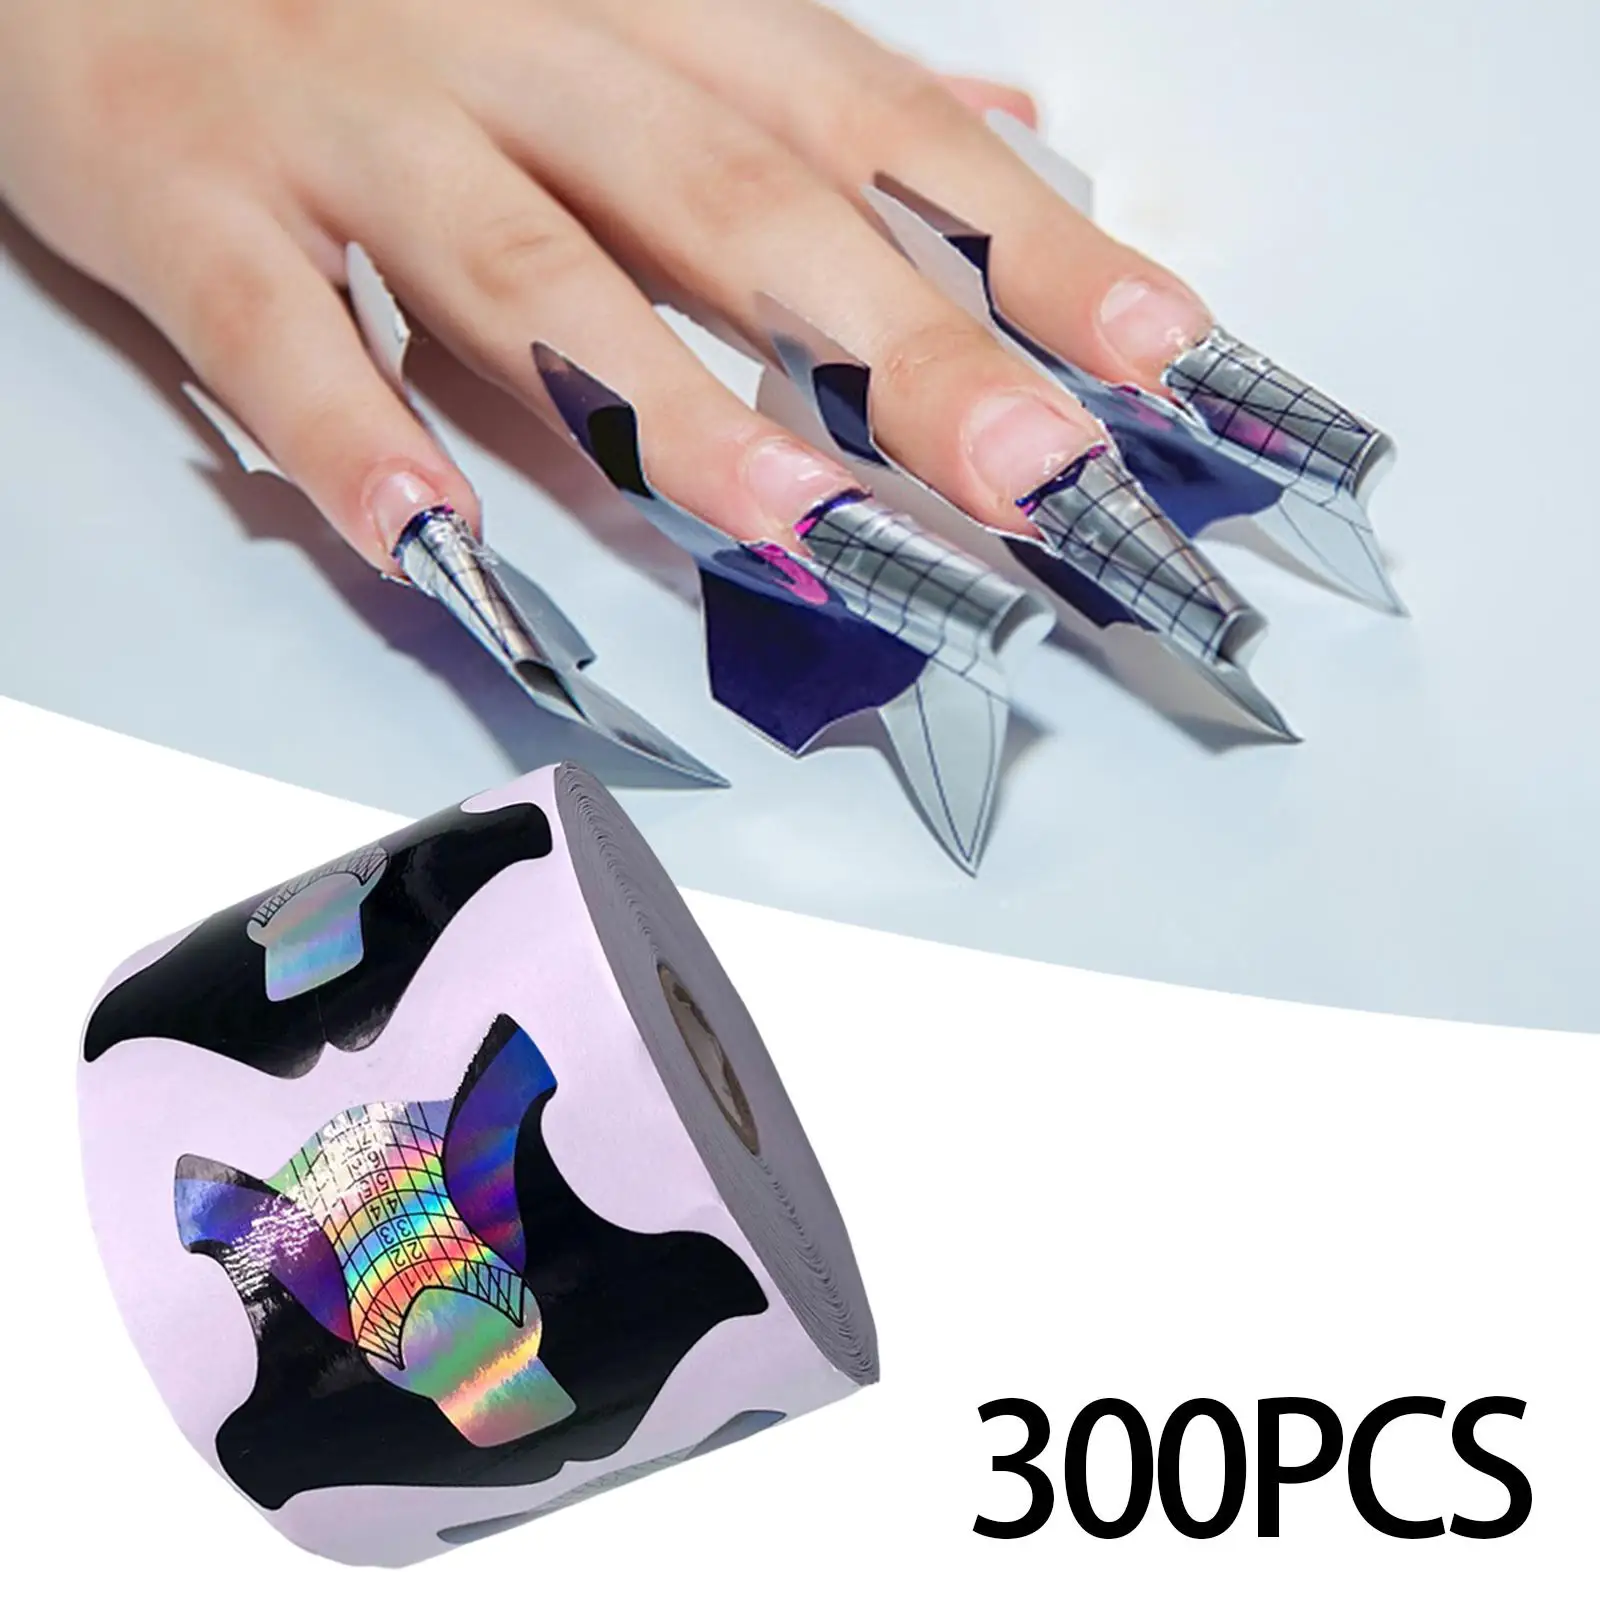 300Pcs Long Nail Forms for Acrylic Nails DIY Manicure Design Nail Extension Forms for Extension Acrylic Nail Molds Builder